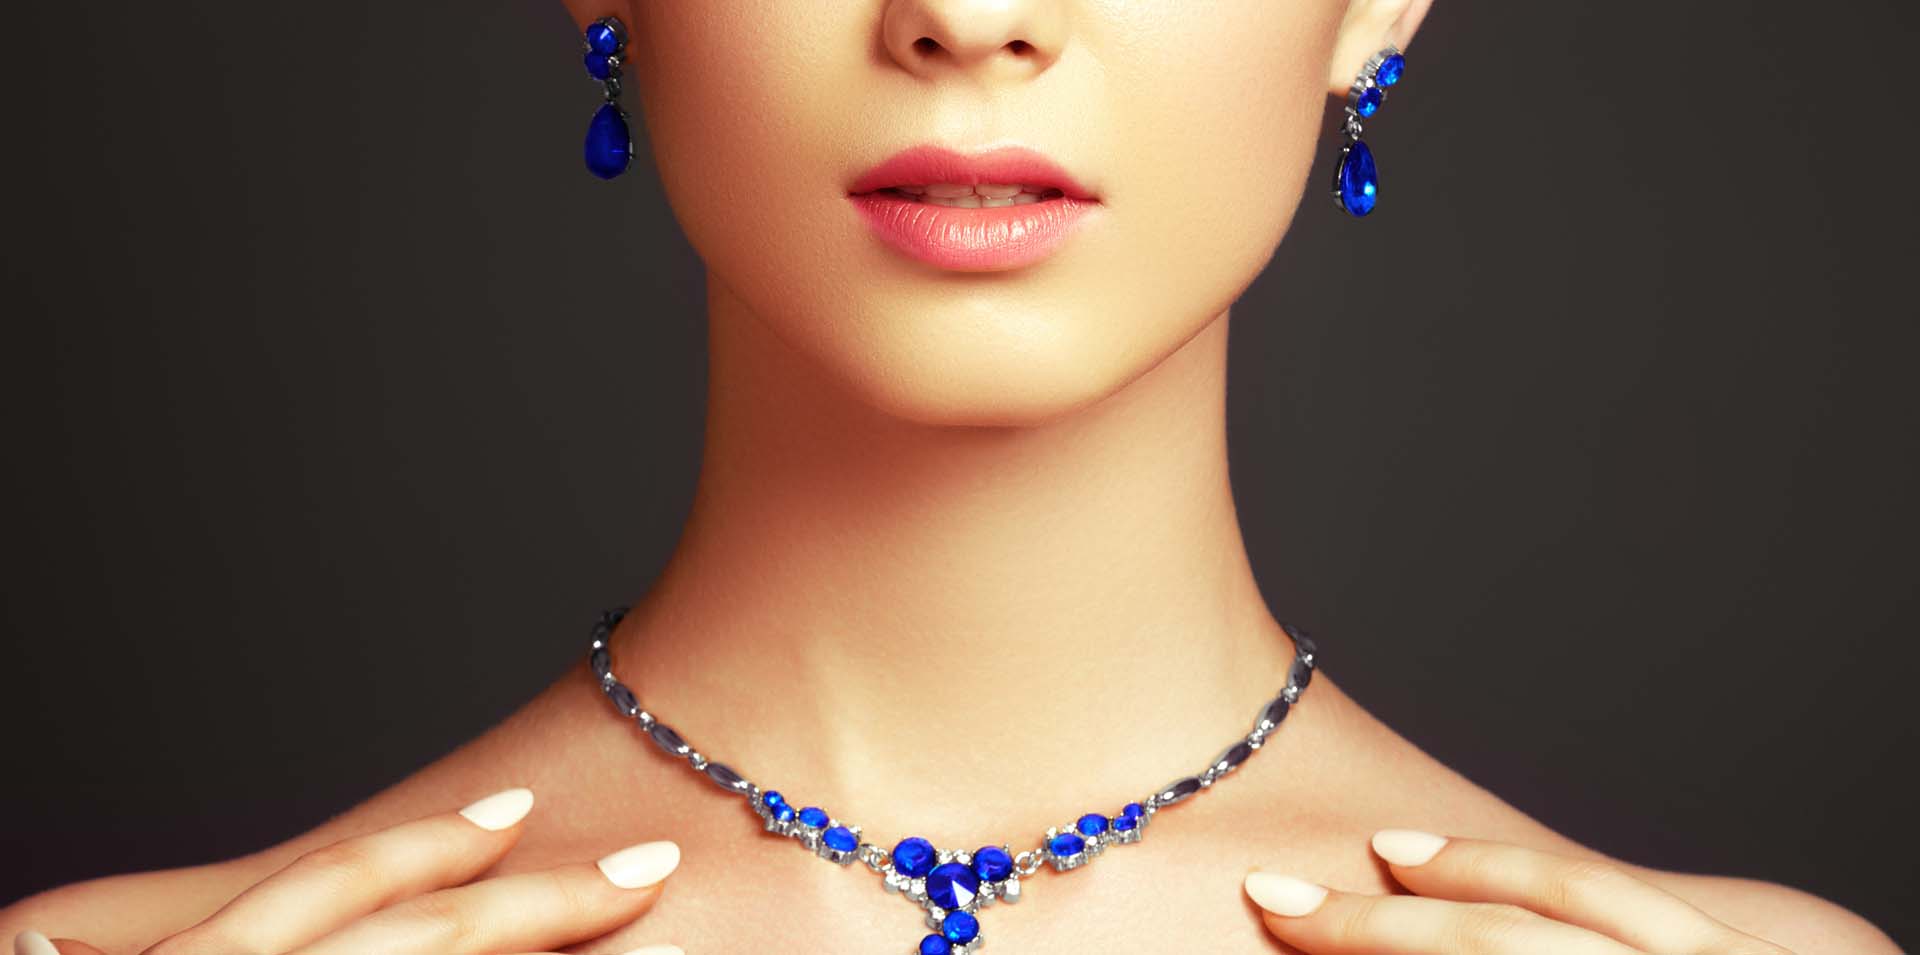 A woman modeling sapphire jewelry: Telephone number 1-877-872-9909